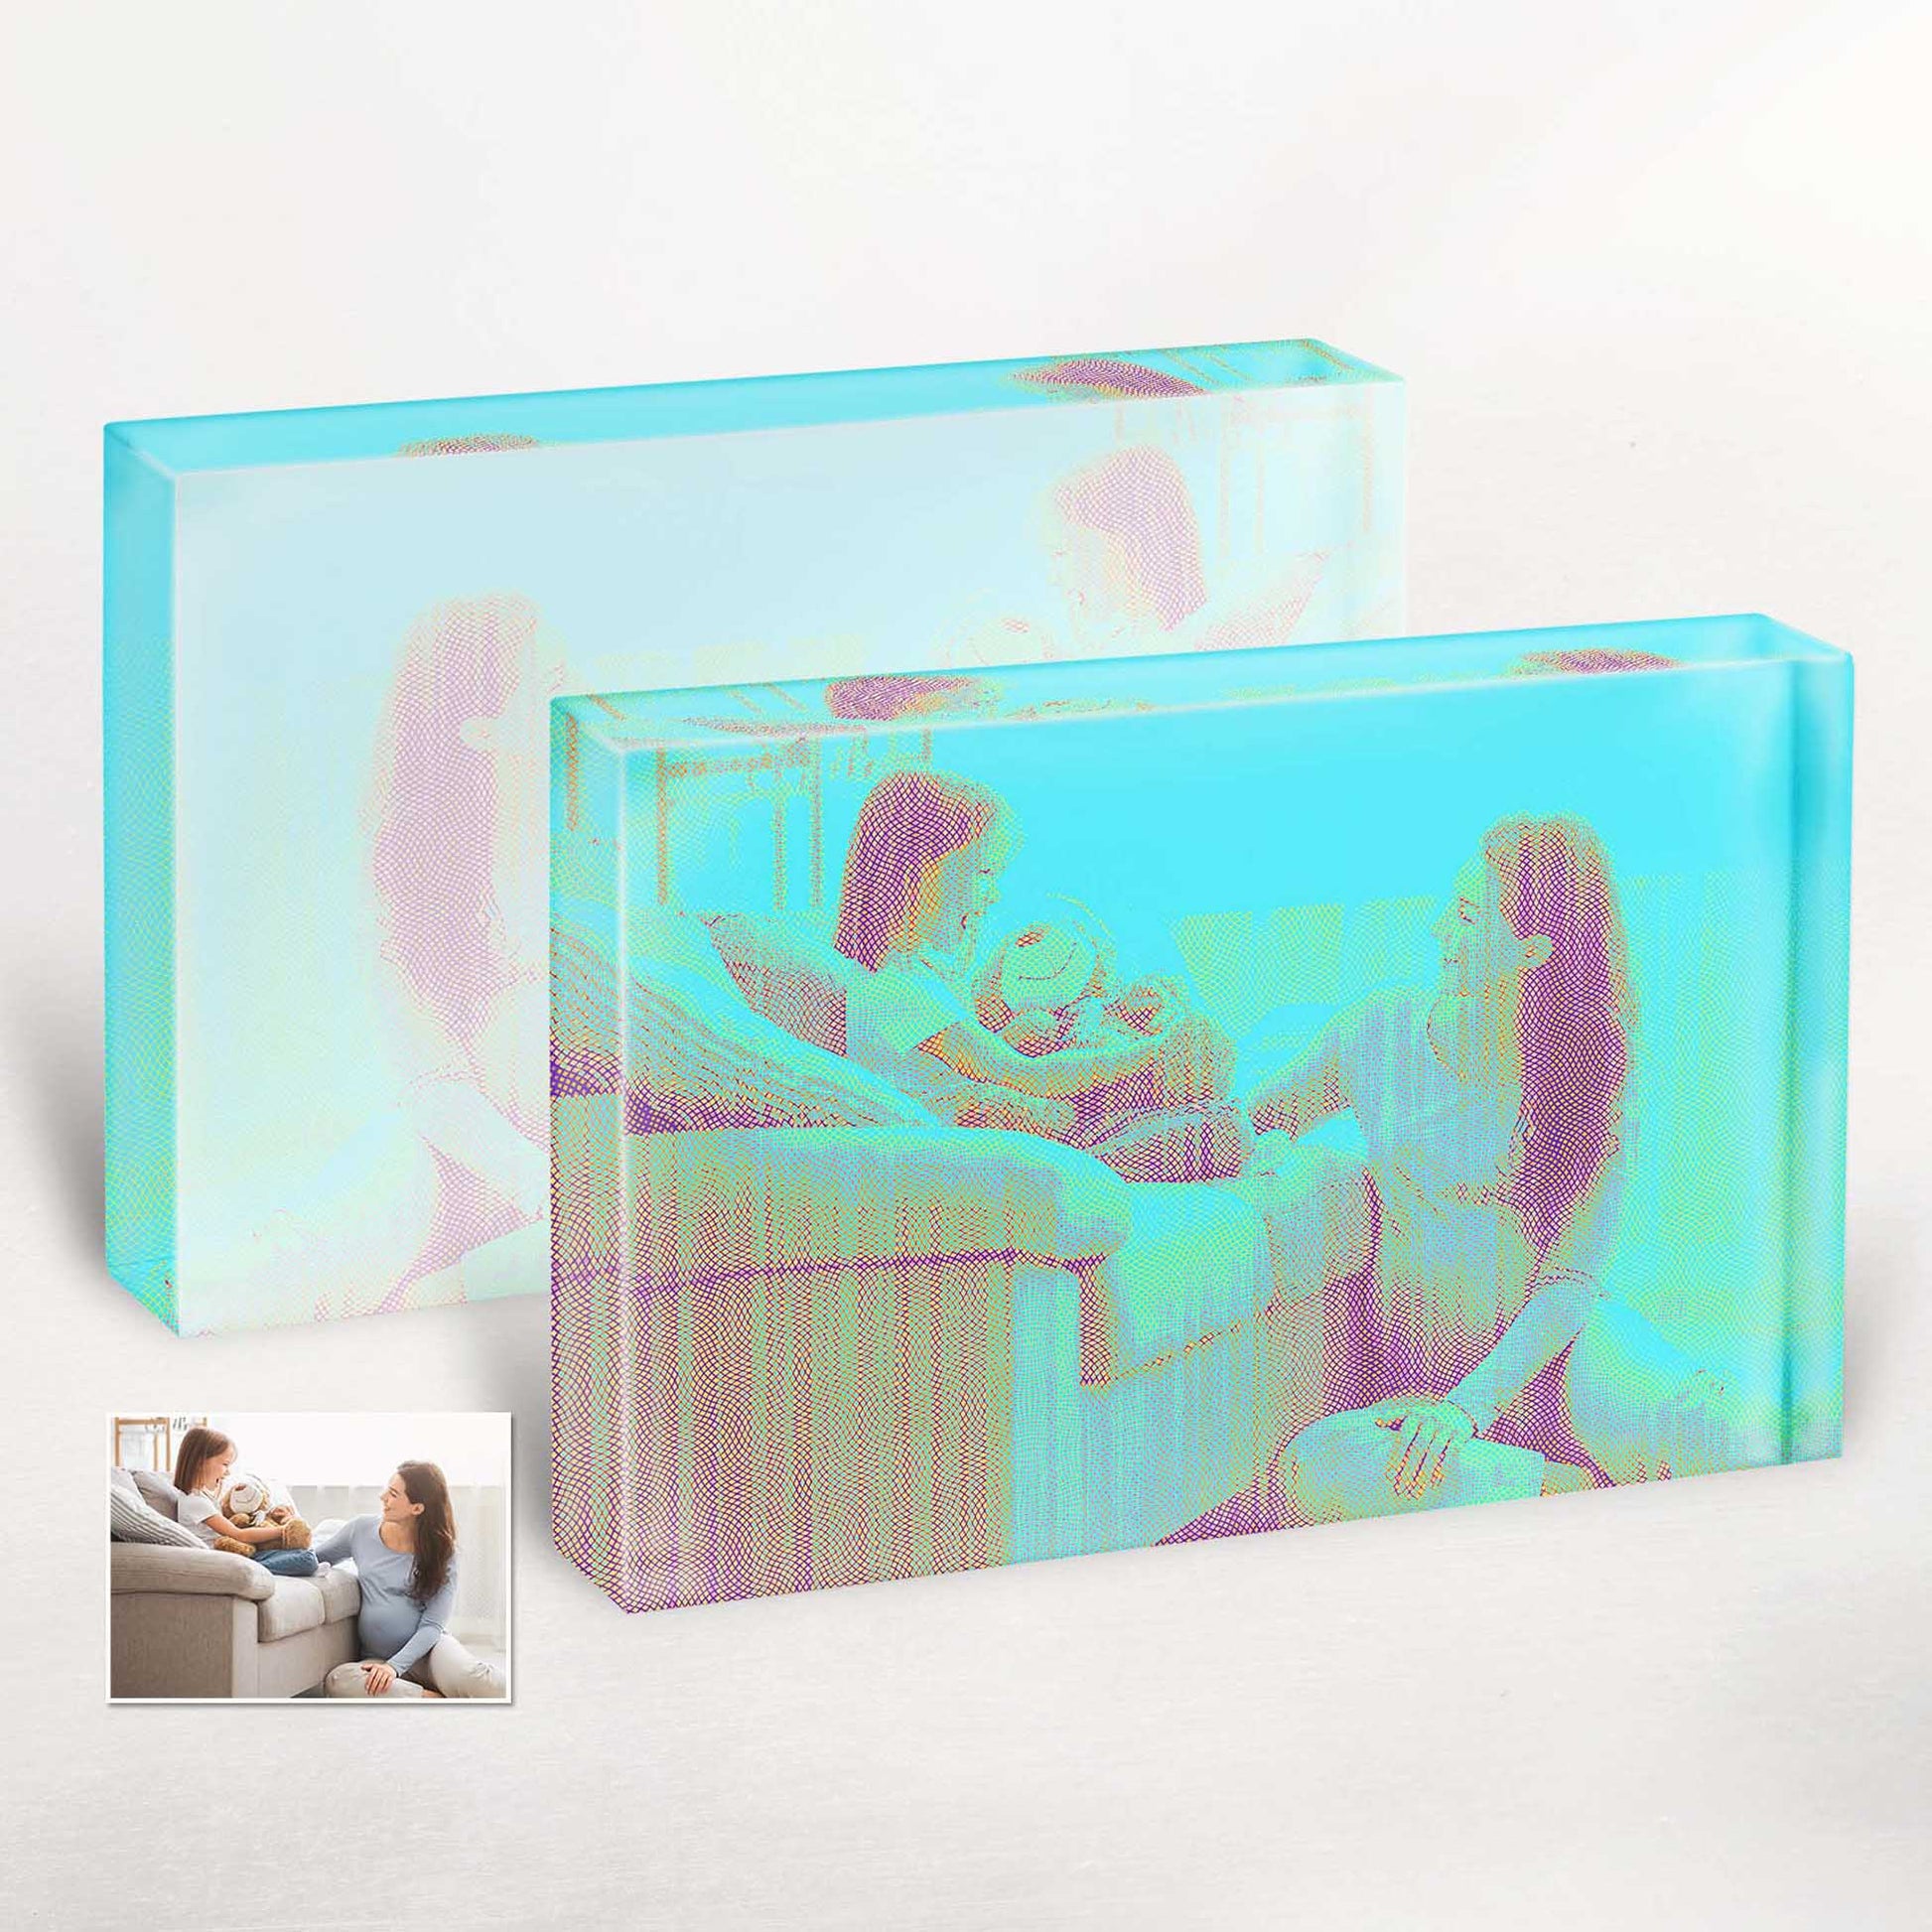 Boyfriend Gift with a Modern Twist: Personalised Blue Engraved Acrylic Block Photo. Make a statement with our cool and hip acrylic block photos. Engraved with your chosen photo, it's a perfect addition to his modern home decor.